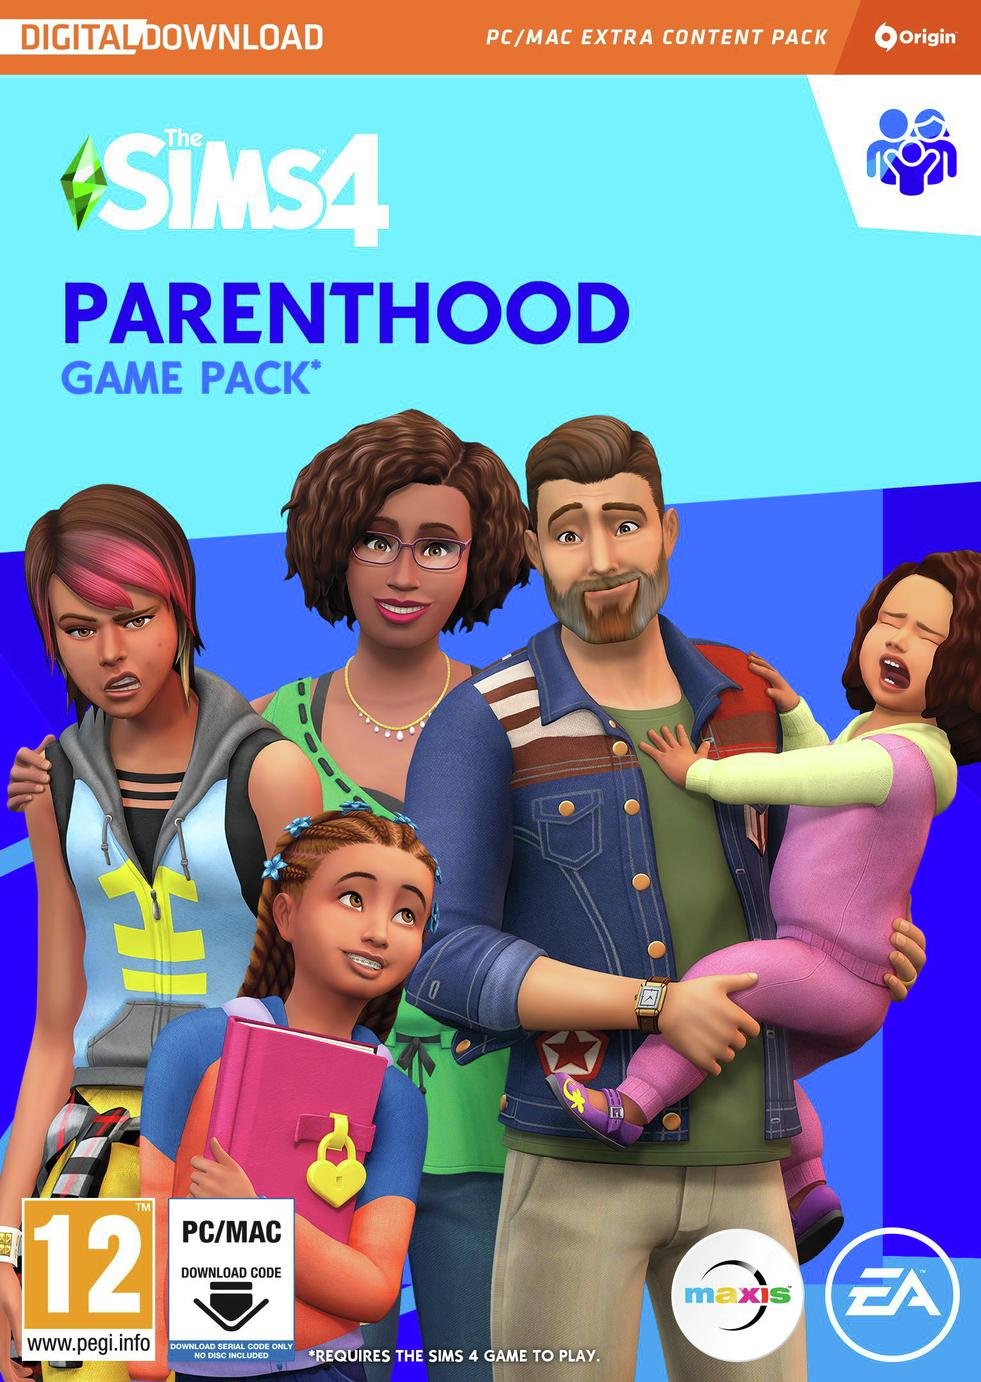 The Sims 4 Parenthood Game Pack PC Game